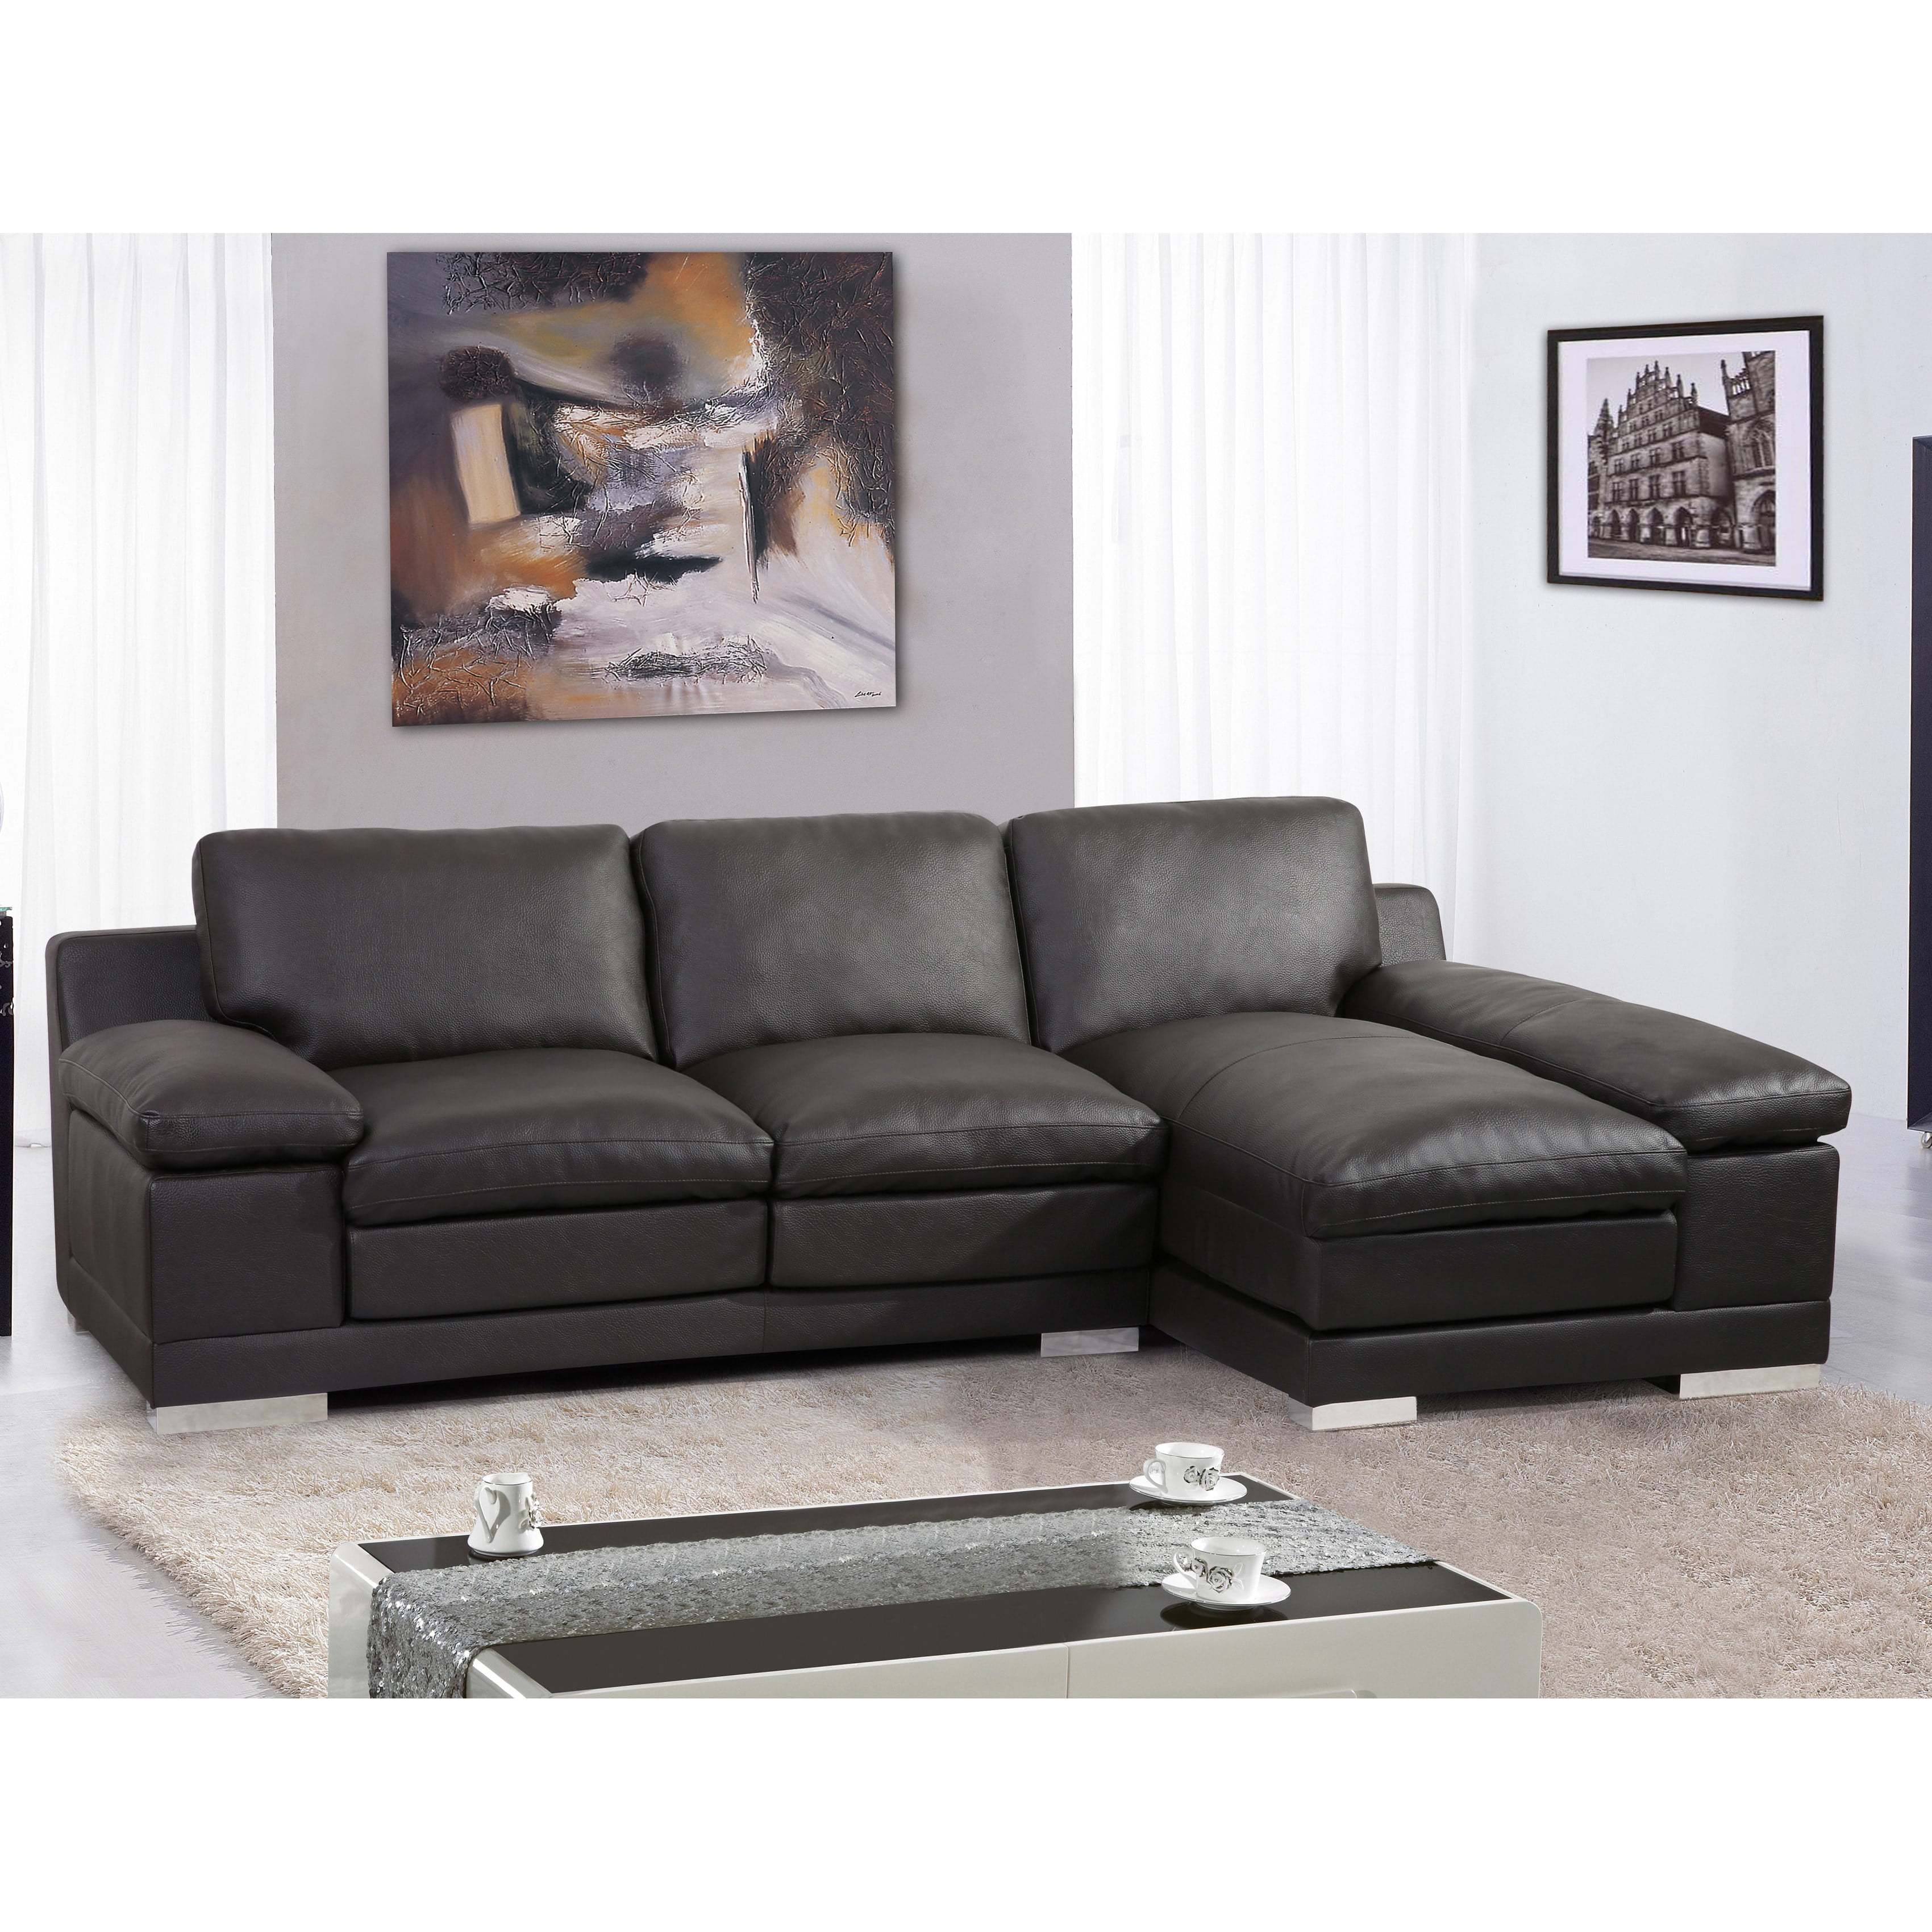 Best Deal for Merrian Living Sectional Couch Connectors, 2 Pack Couch